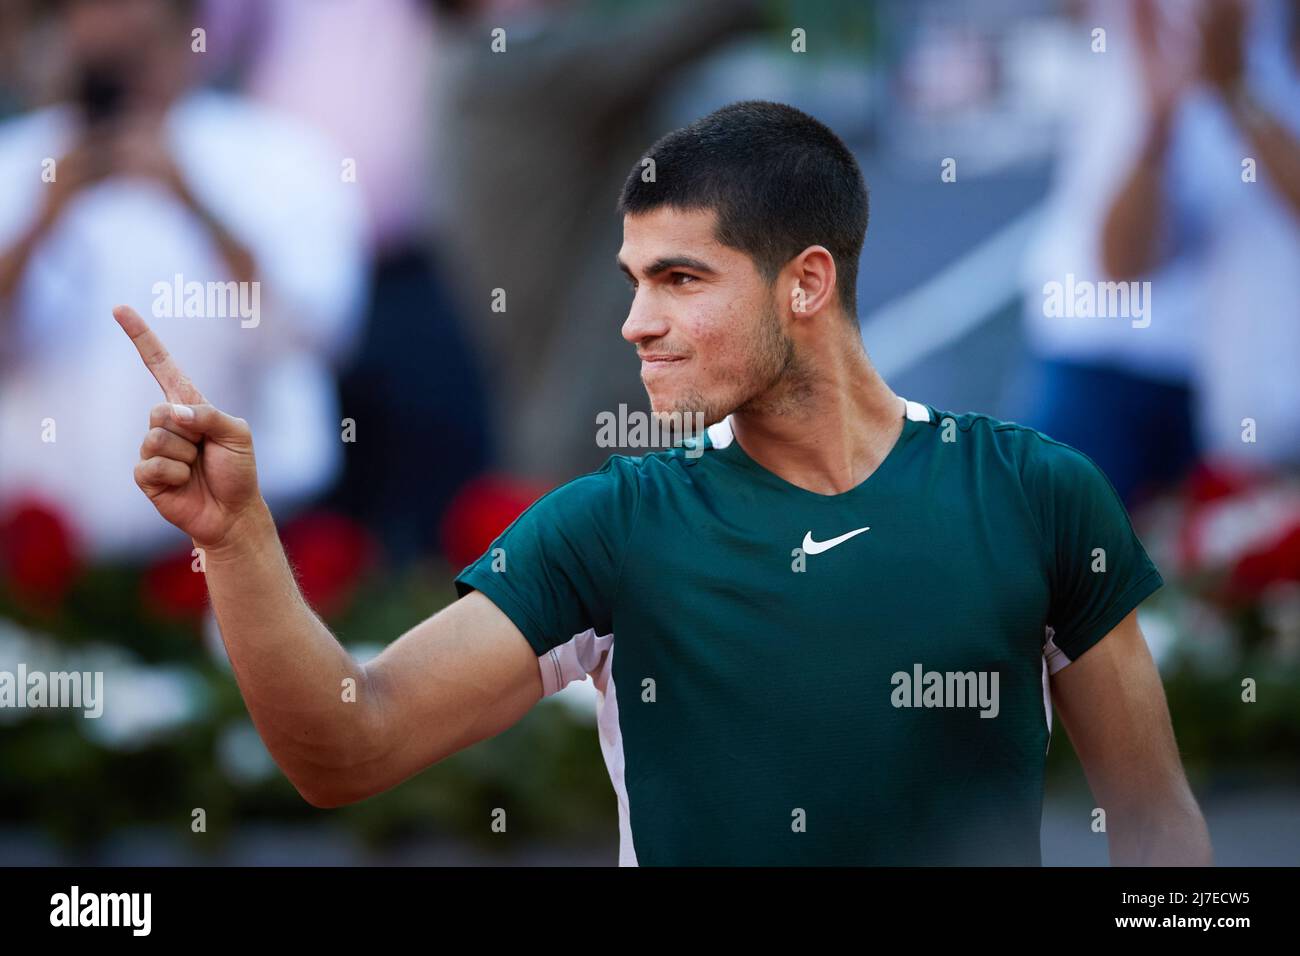 MADRID, May 9, 2022 (Xinhua) -- Carlos Alcaraz of Spain celebrates after the men's singles final against Alexander Zverev of Germany at the Madrid Open in Madrid, Spain, May 8, 2022. (Xinhua/Meng Dingbo) Stock Photo